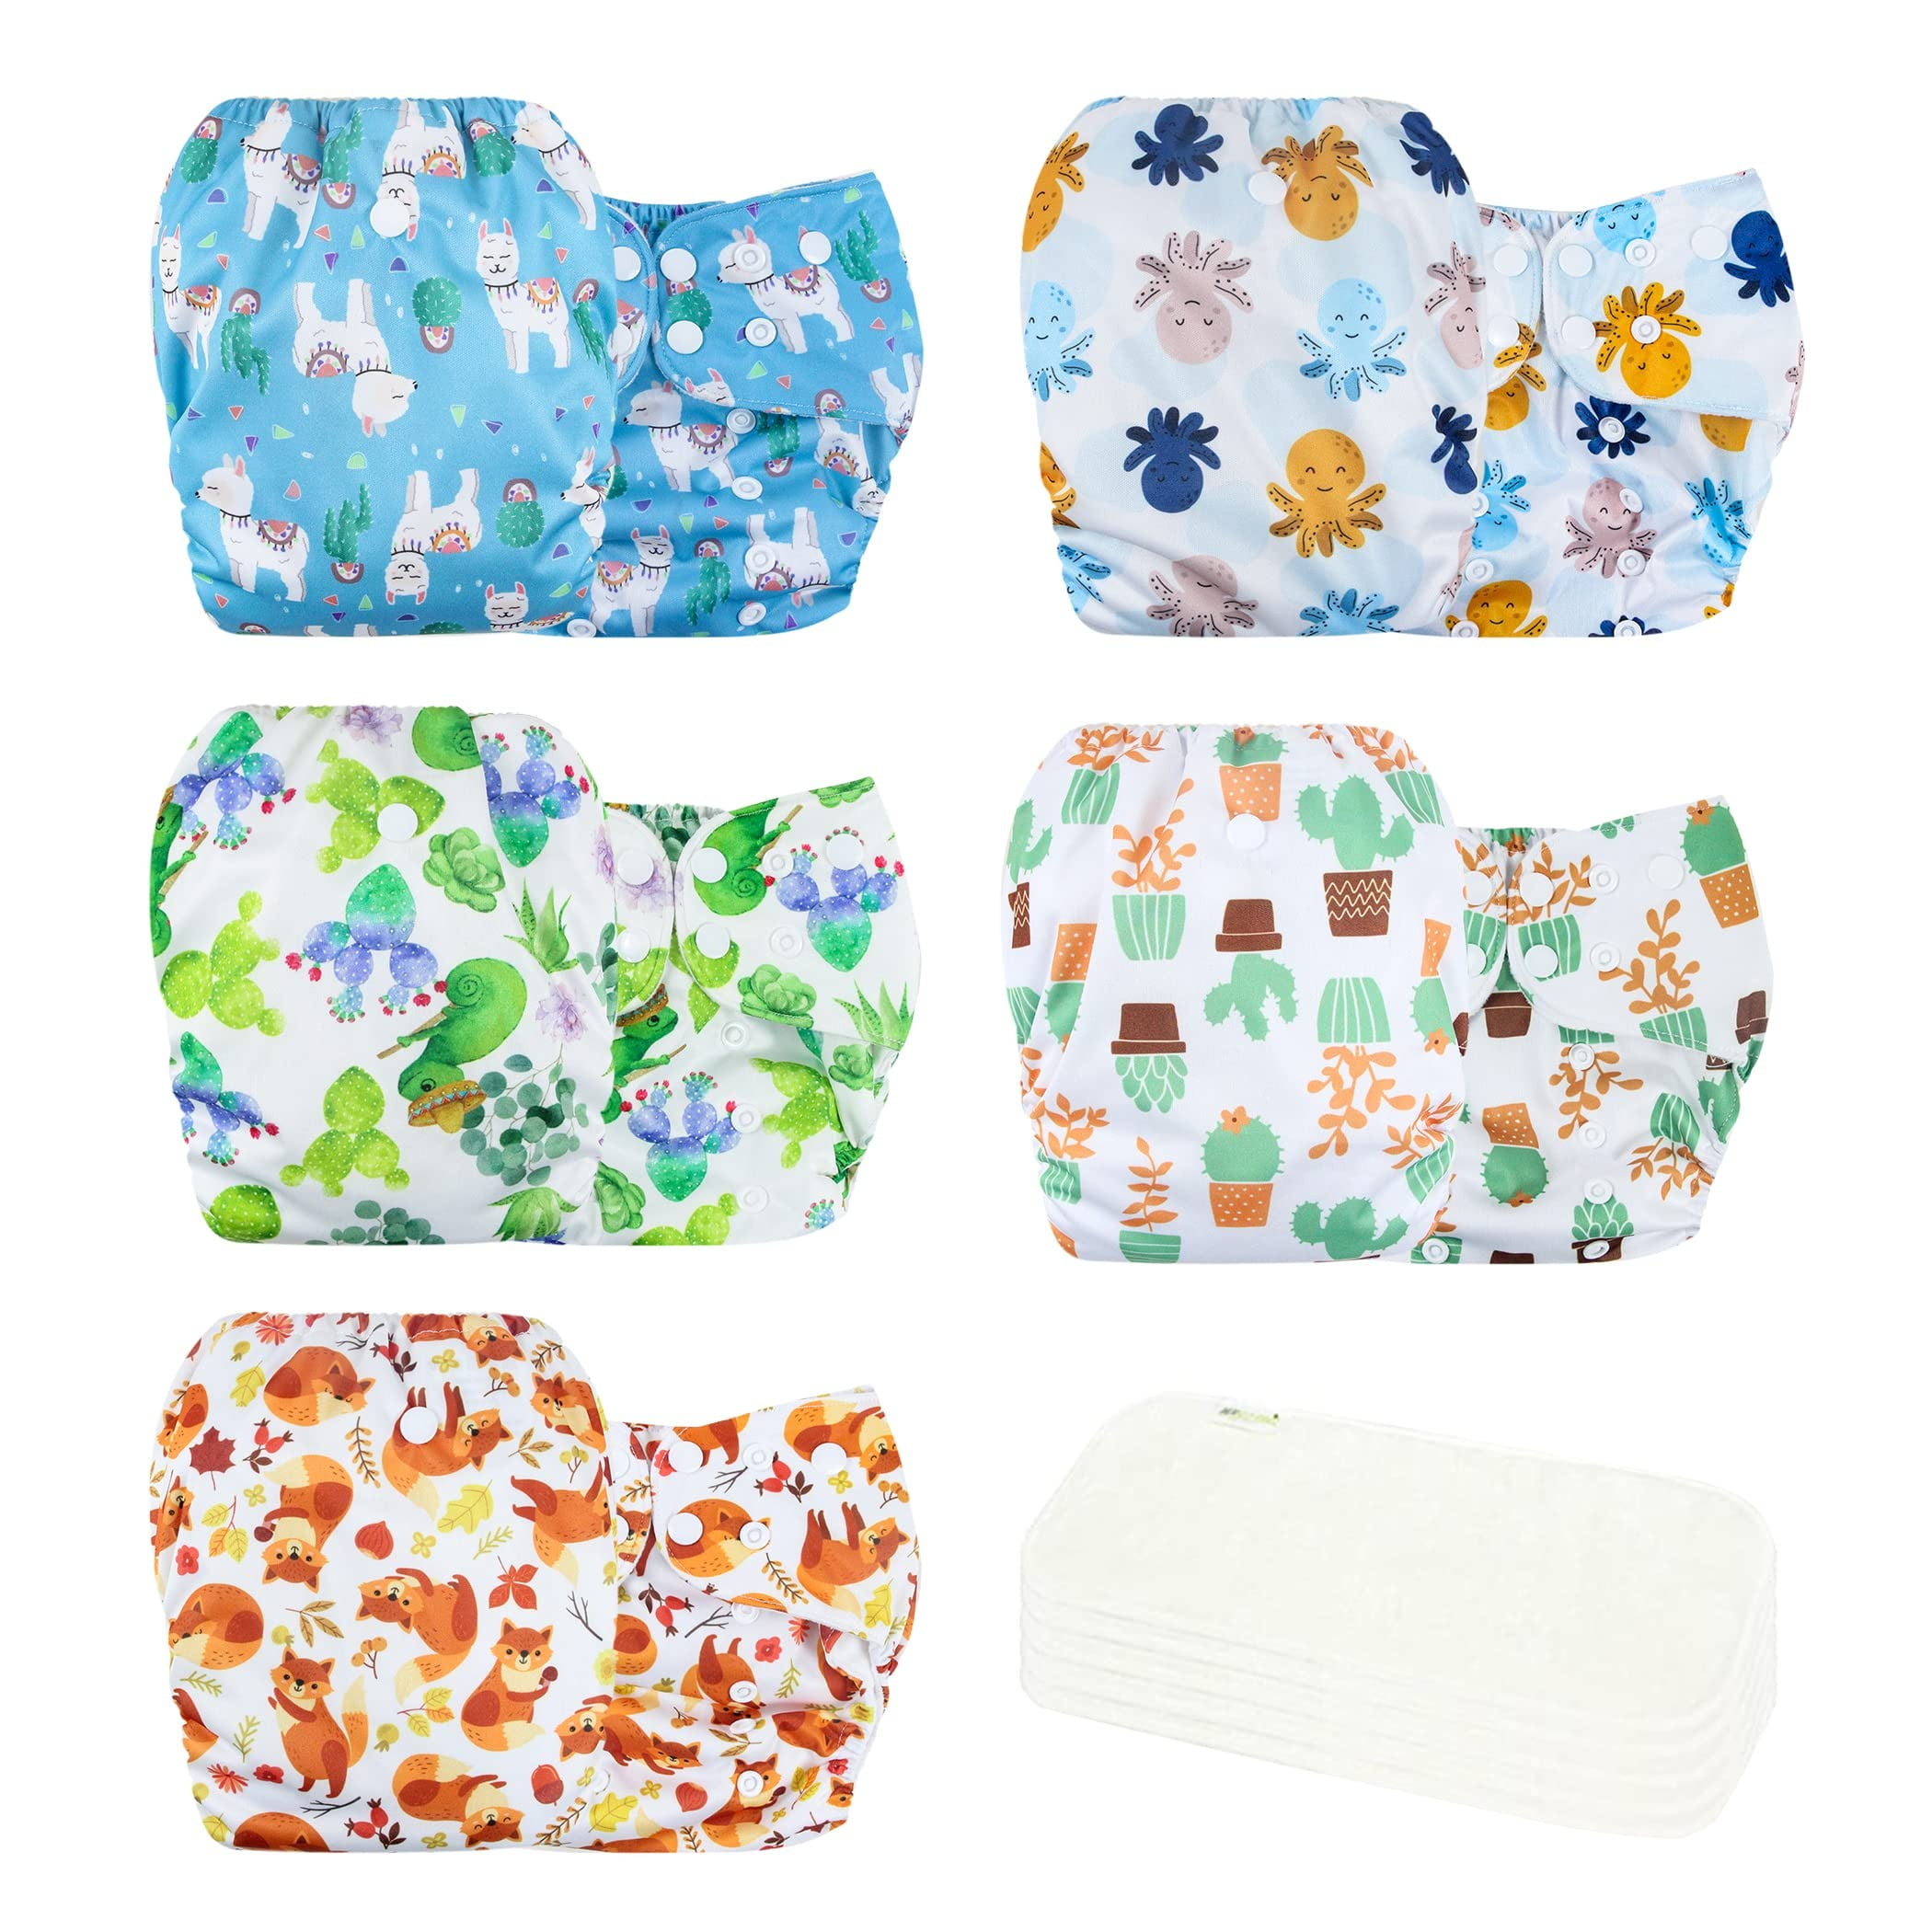 Nearkoi Baby Cloth Diapers One Size Adjustable Washable Reusable Baby Cloth Pocket Diapers 5 Pack Colored Sunlight 5 Bamboo Inserts 